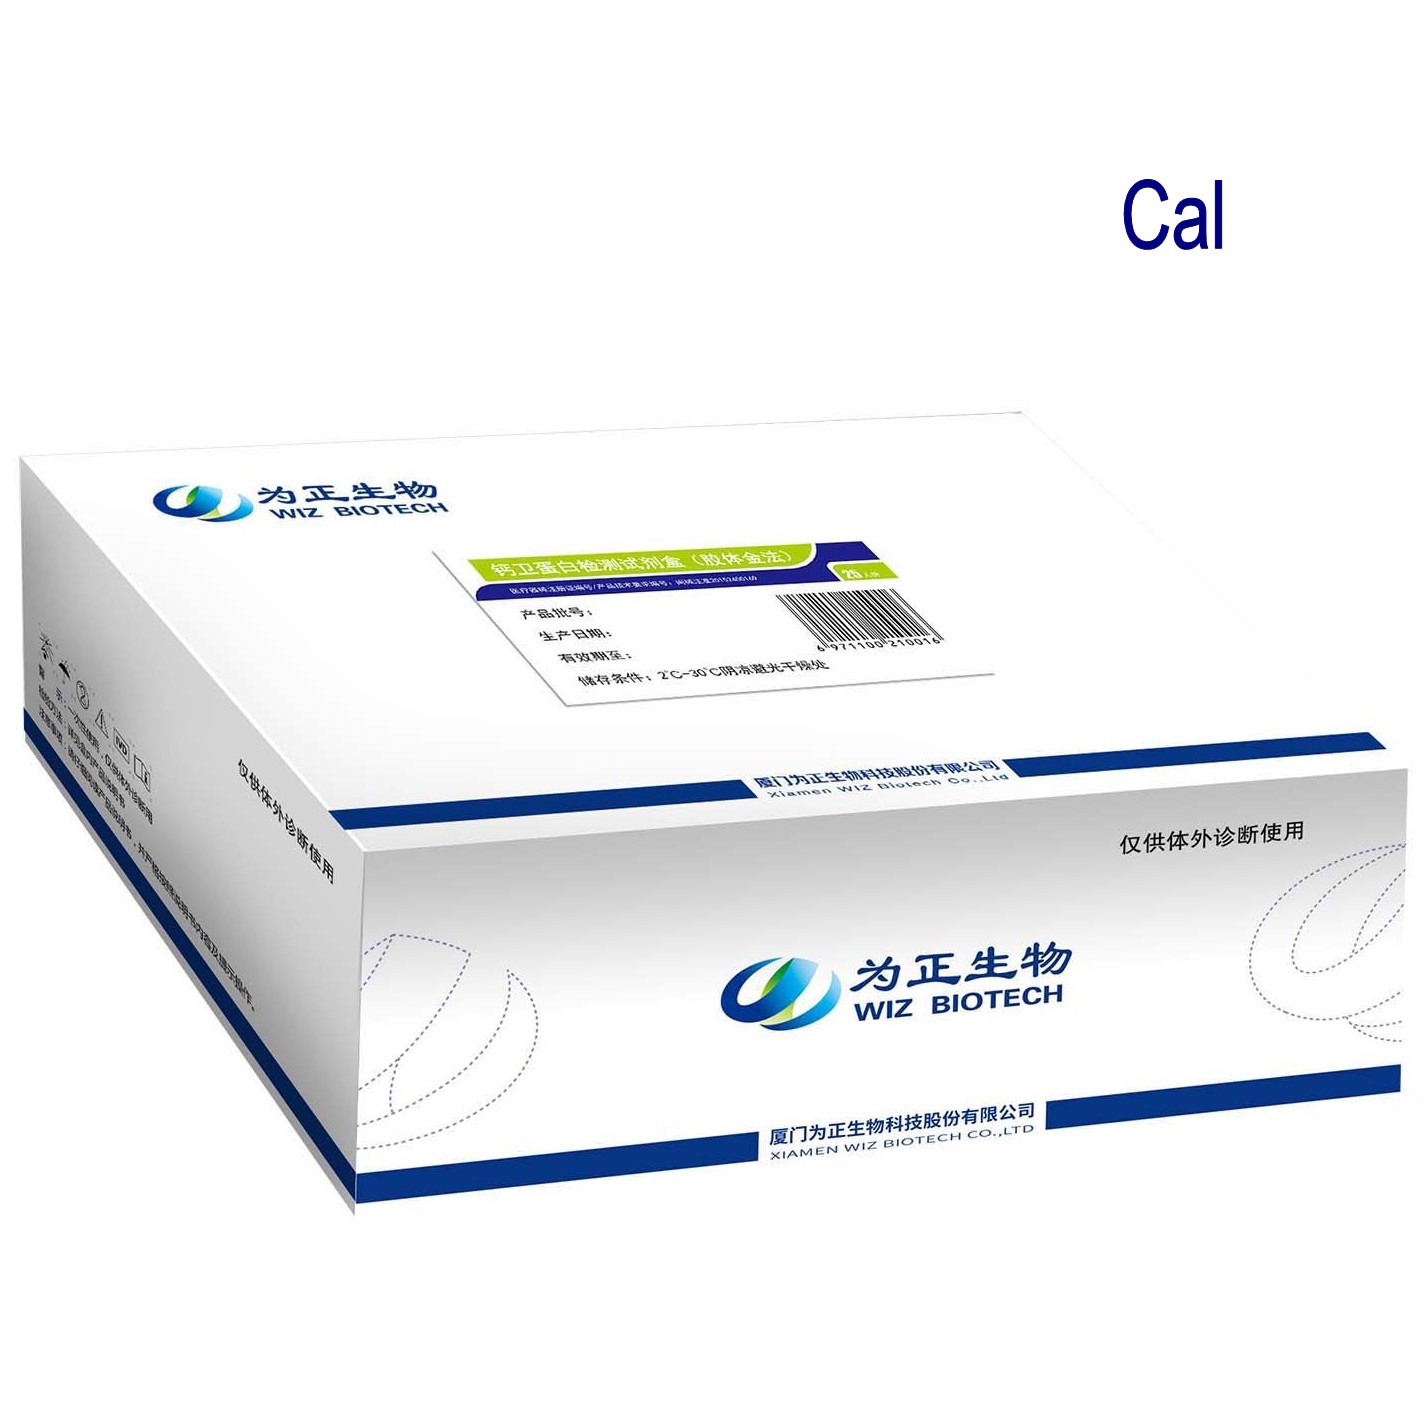 Factory wholesale Medical Hiv Diagnotic Test Strip - Diagnostic Kit（Colloidal Gold）for Calprotectin – Baysen